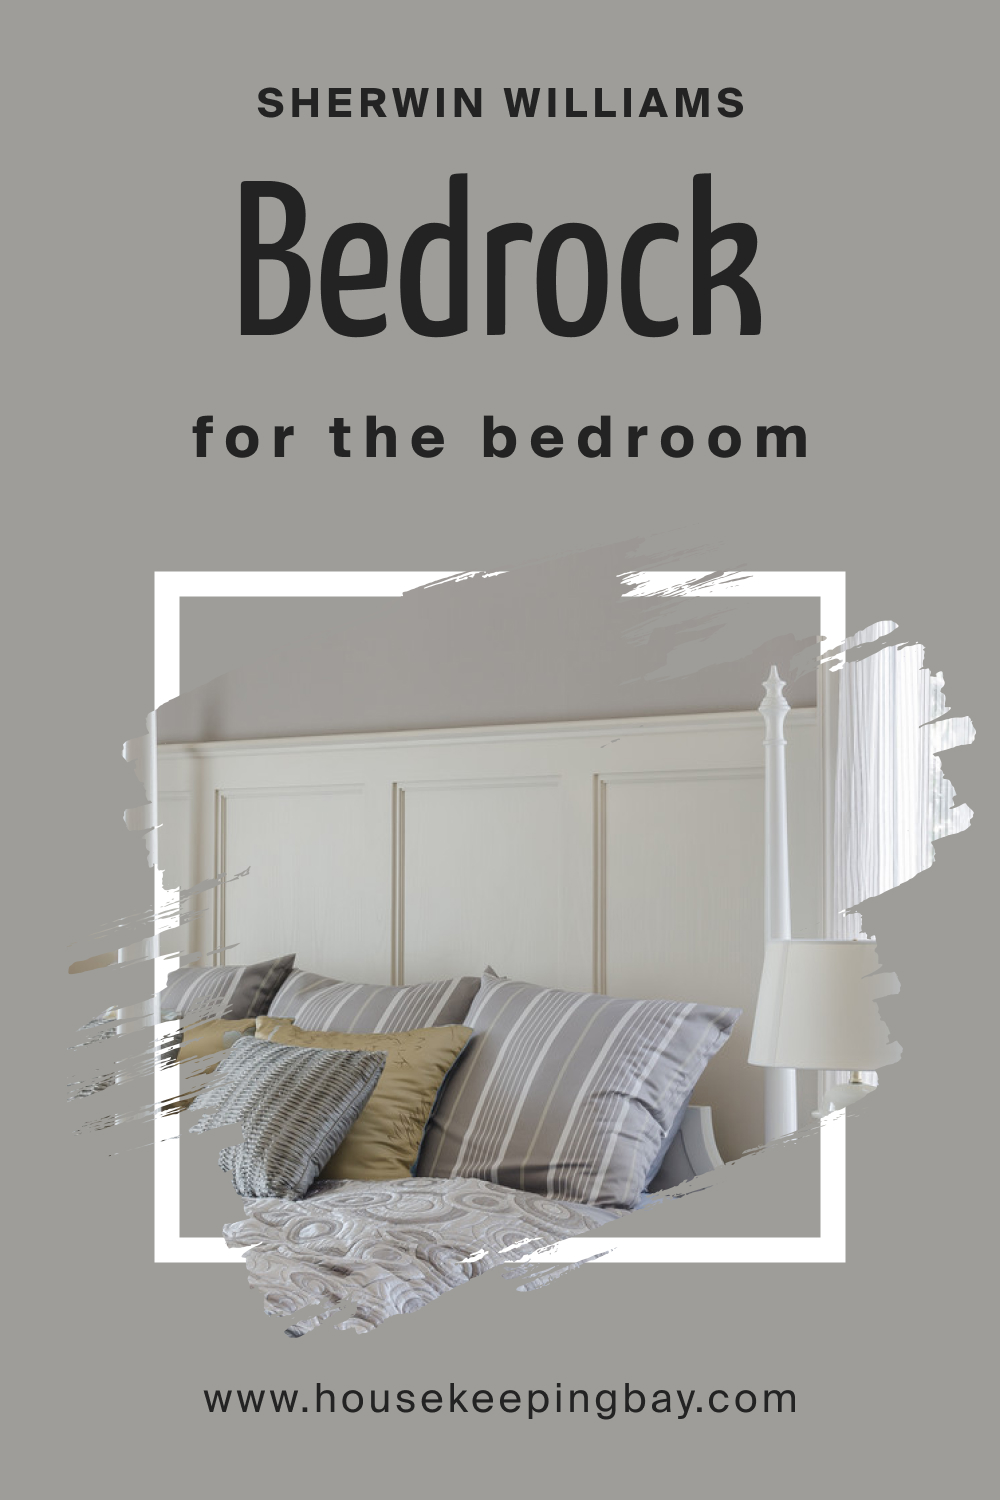 Sherwin Williams. SW 9563 Bedrock For the bedroom